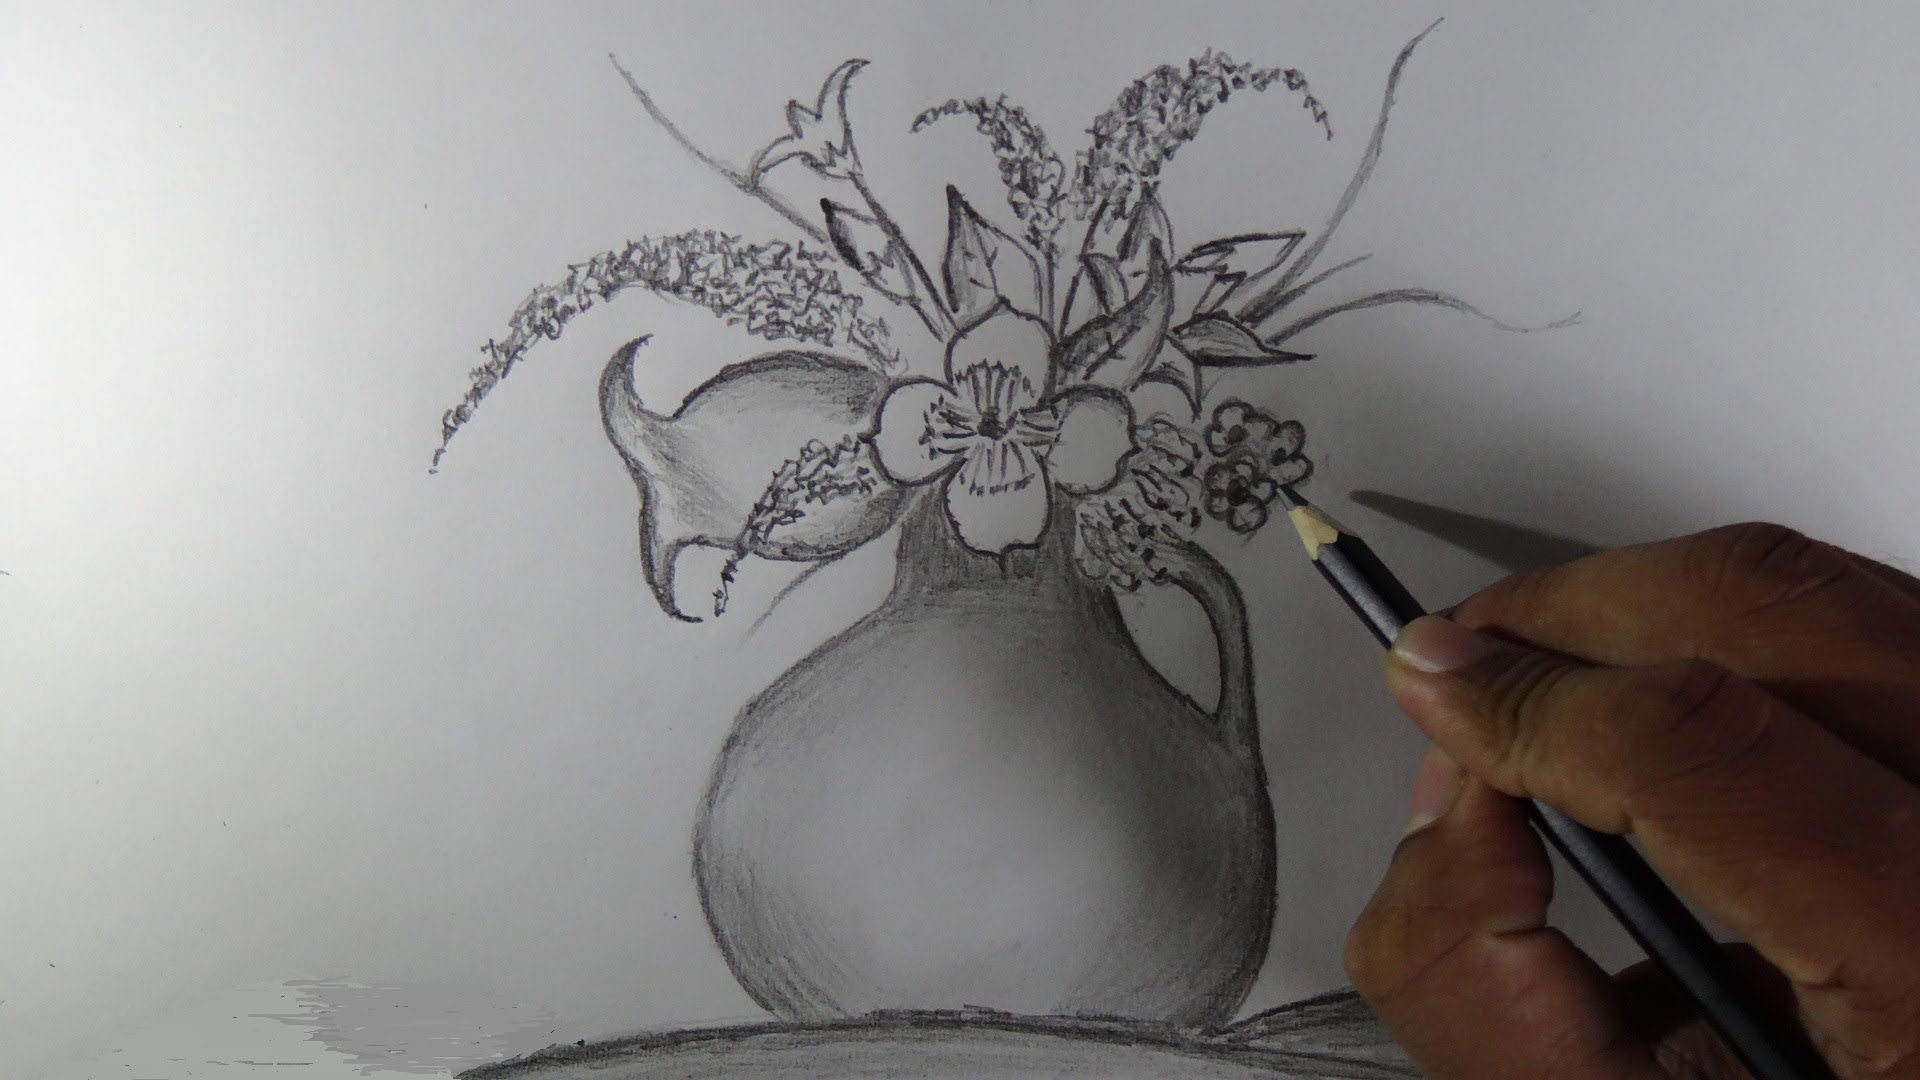 How to draw a flower vase - Pencil drawing - YouTube